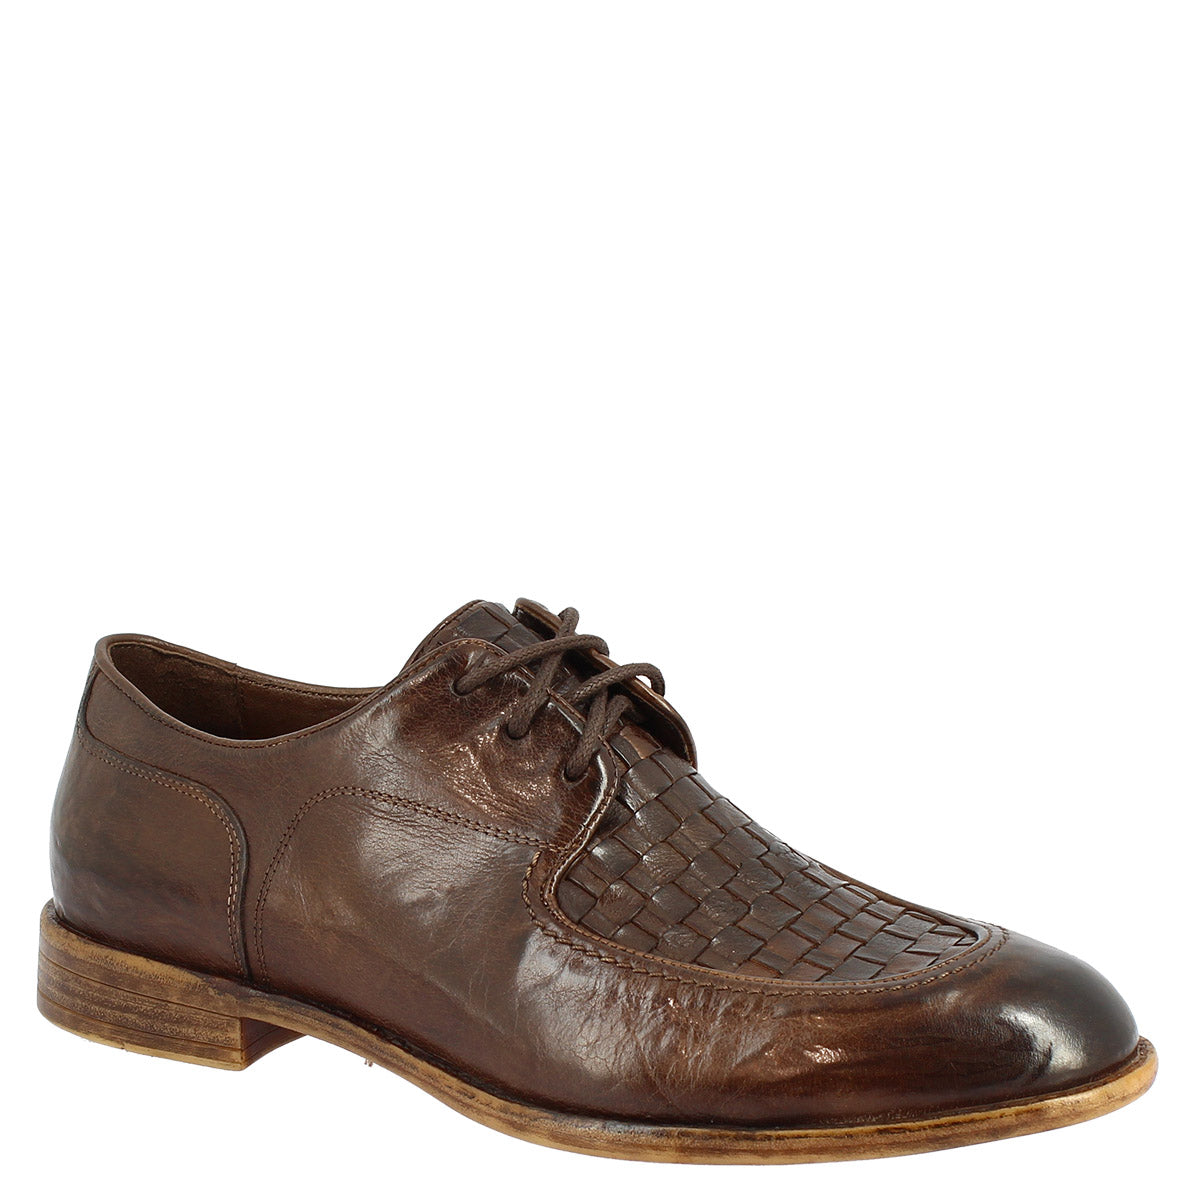 Men's handmade lace-up shoes in dark brown leather